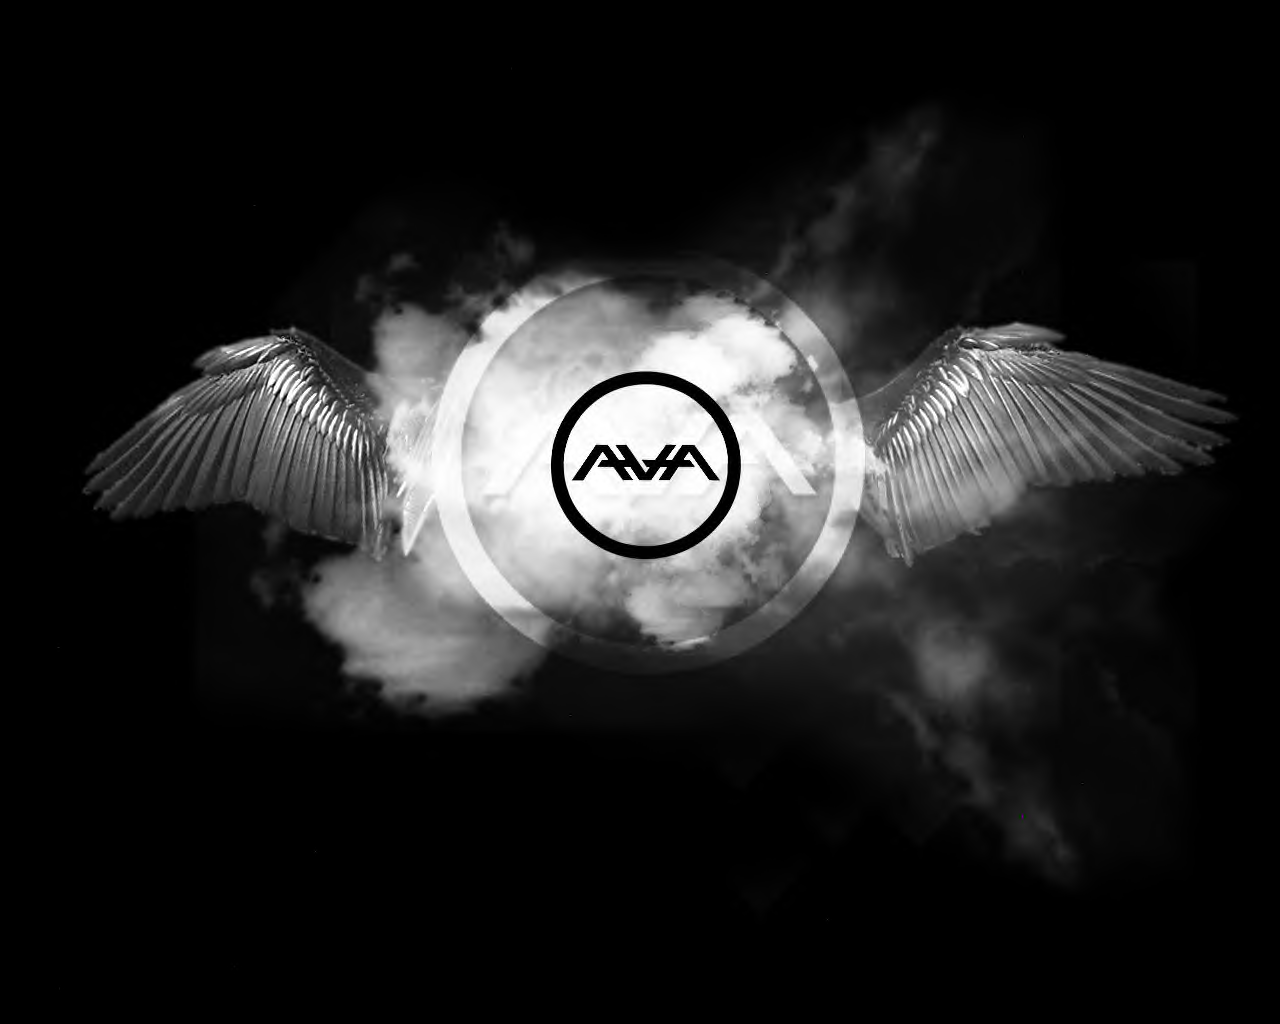 AVA - Angels and Airwaves